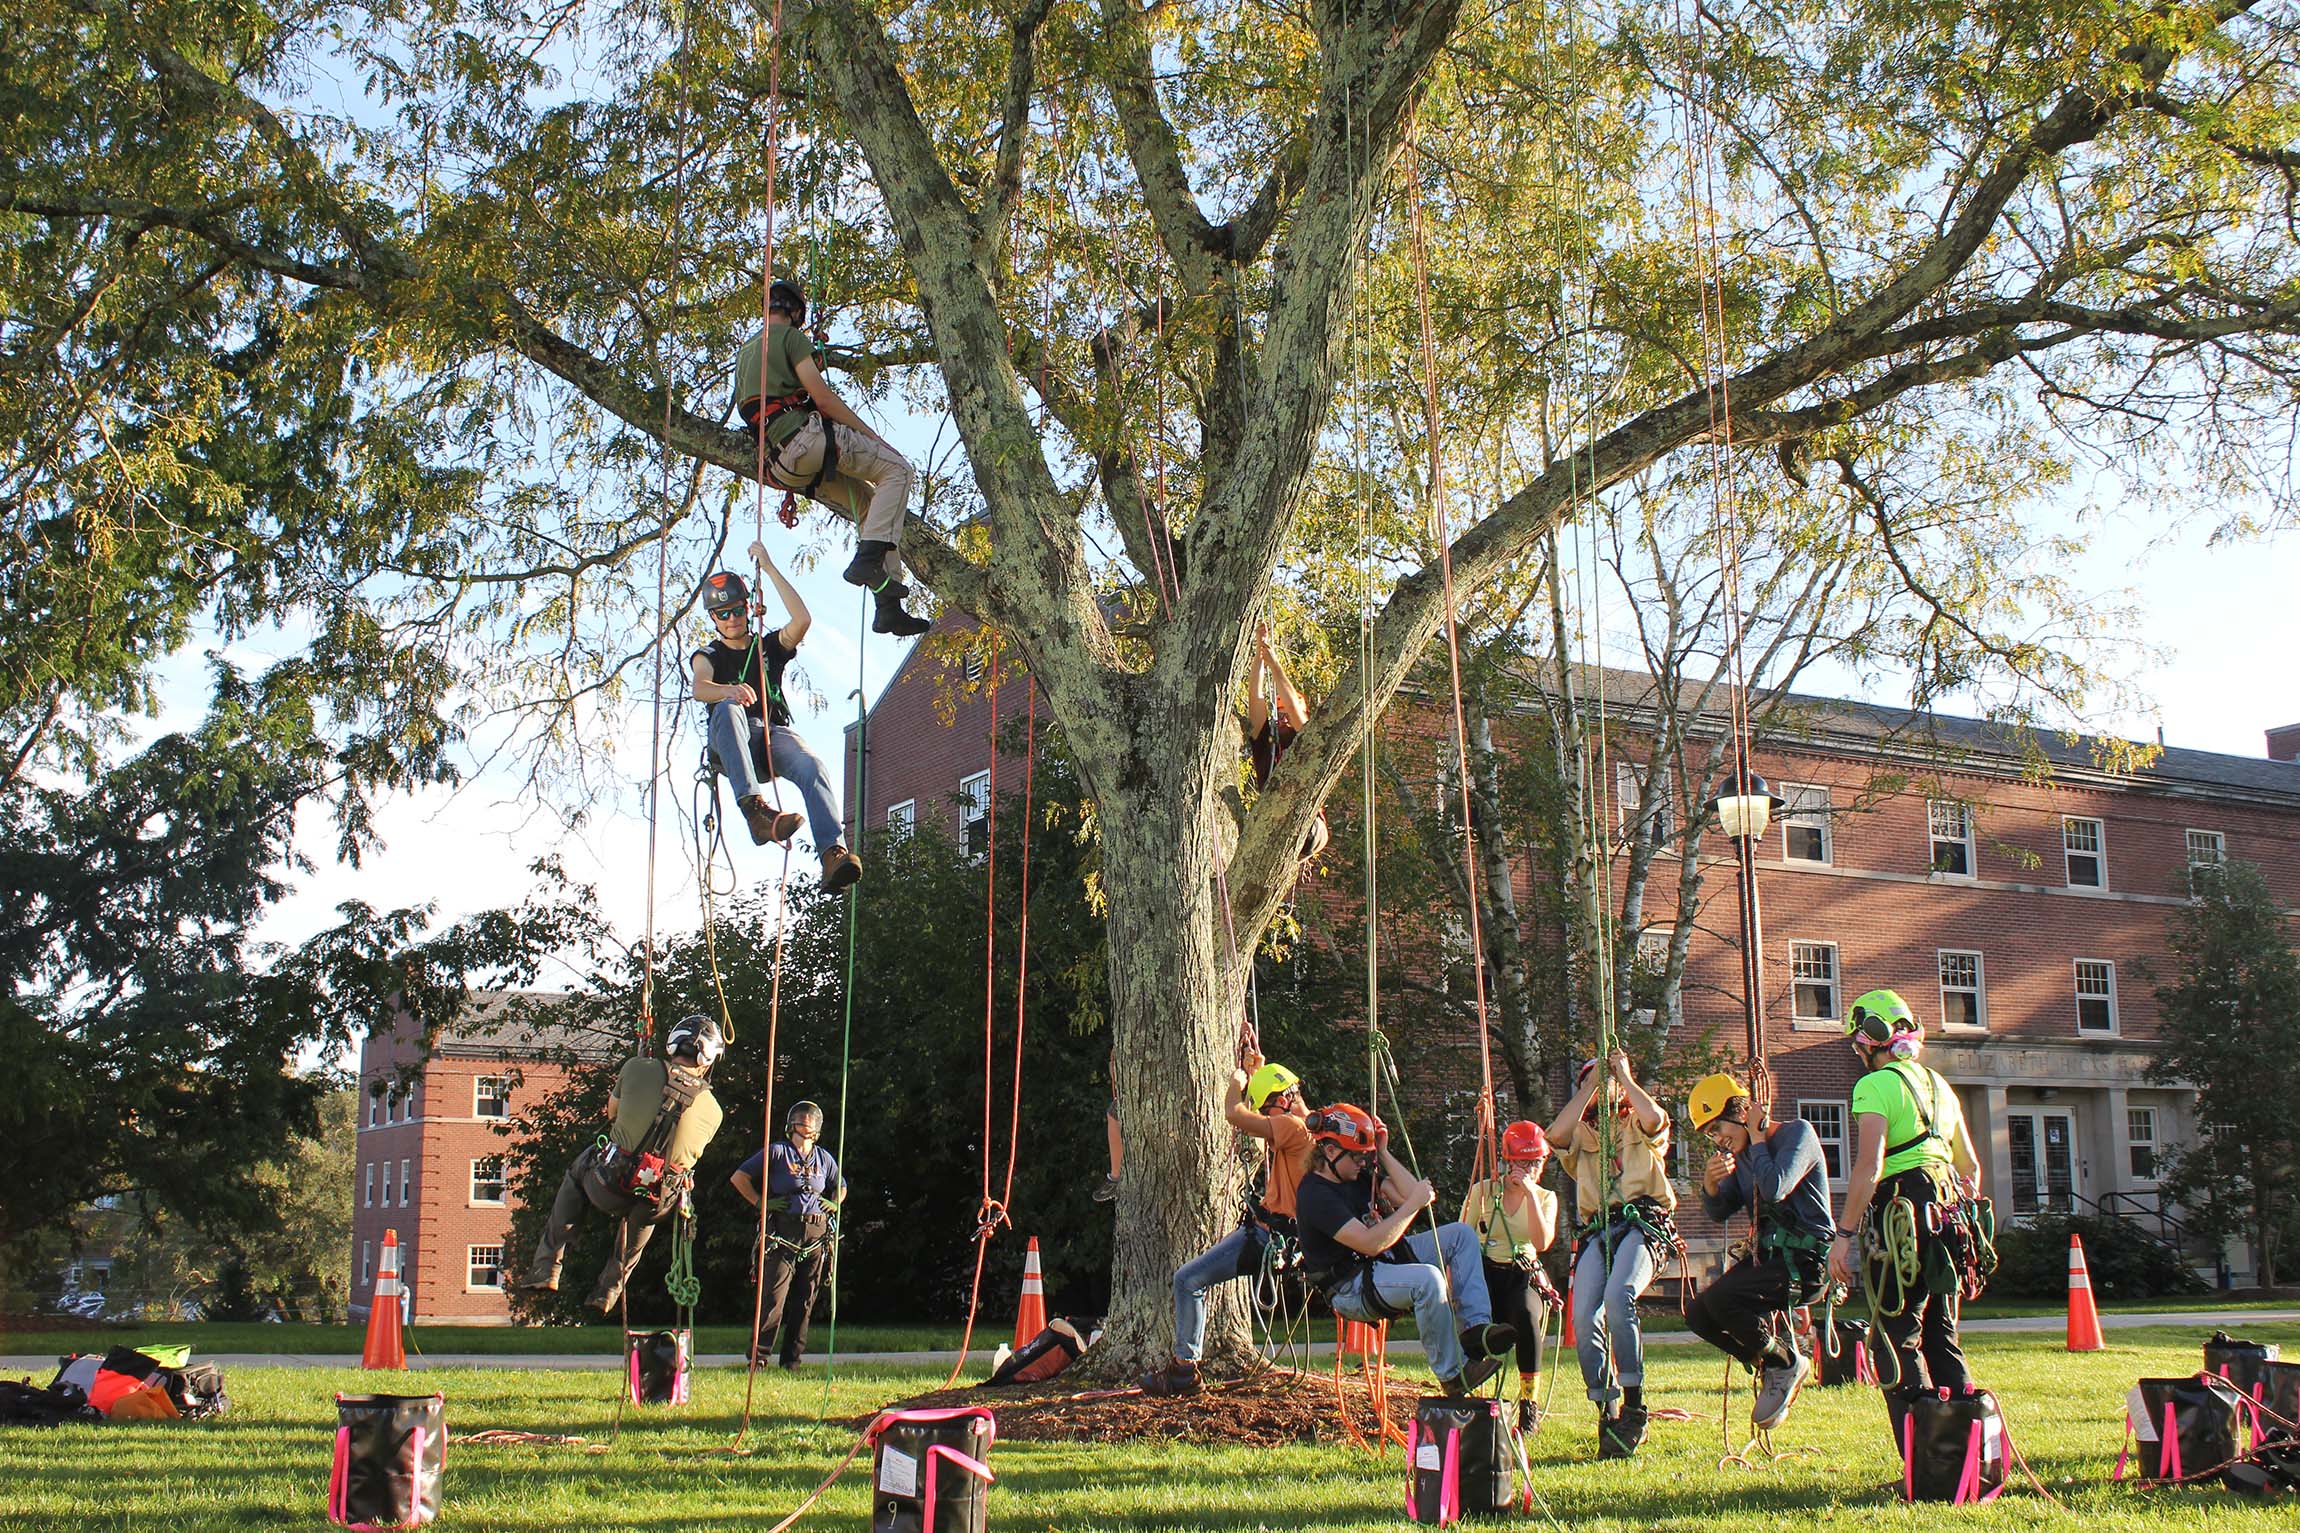 Students climbing trees on the Storr's campus